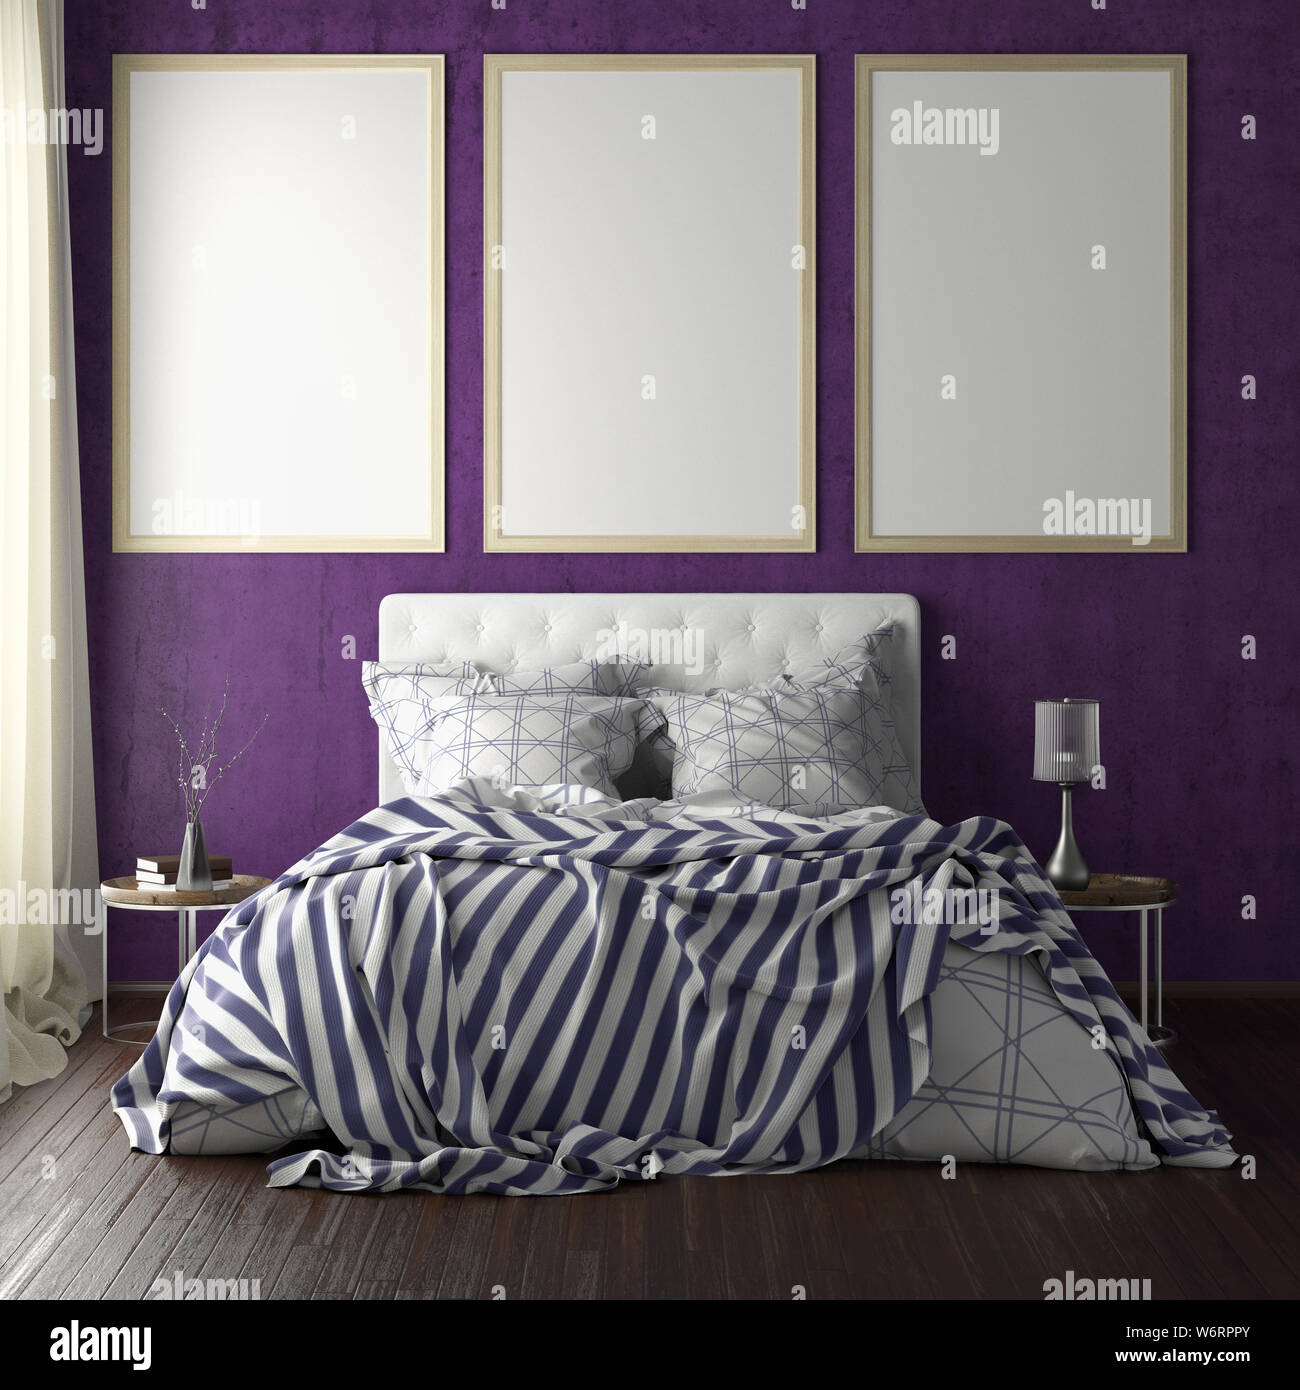 Three vertical poster frame mockups above the bed on violet wall in bedroom. Soft morning light through the curtain. 3d illustration Stock Photo